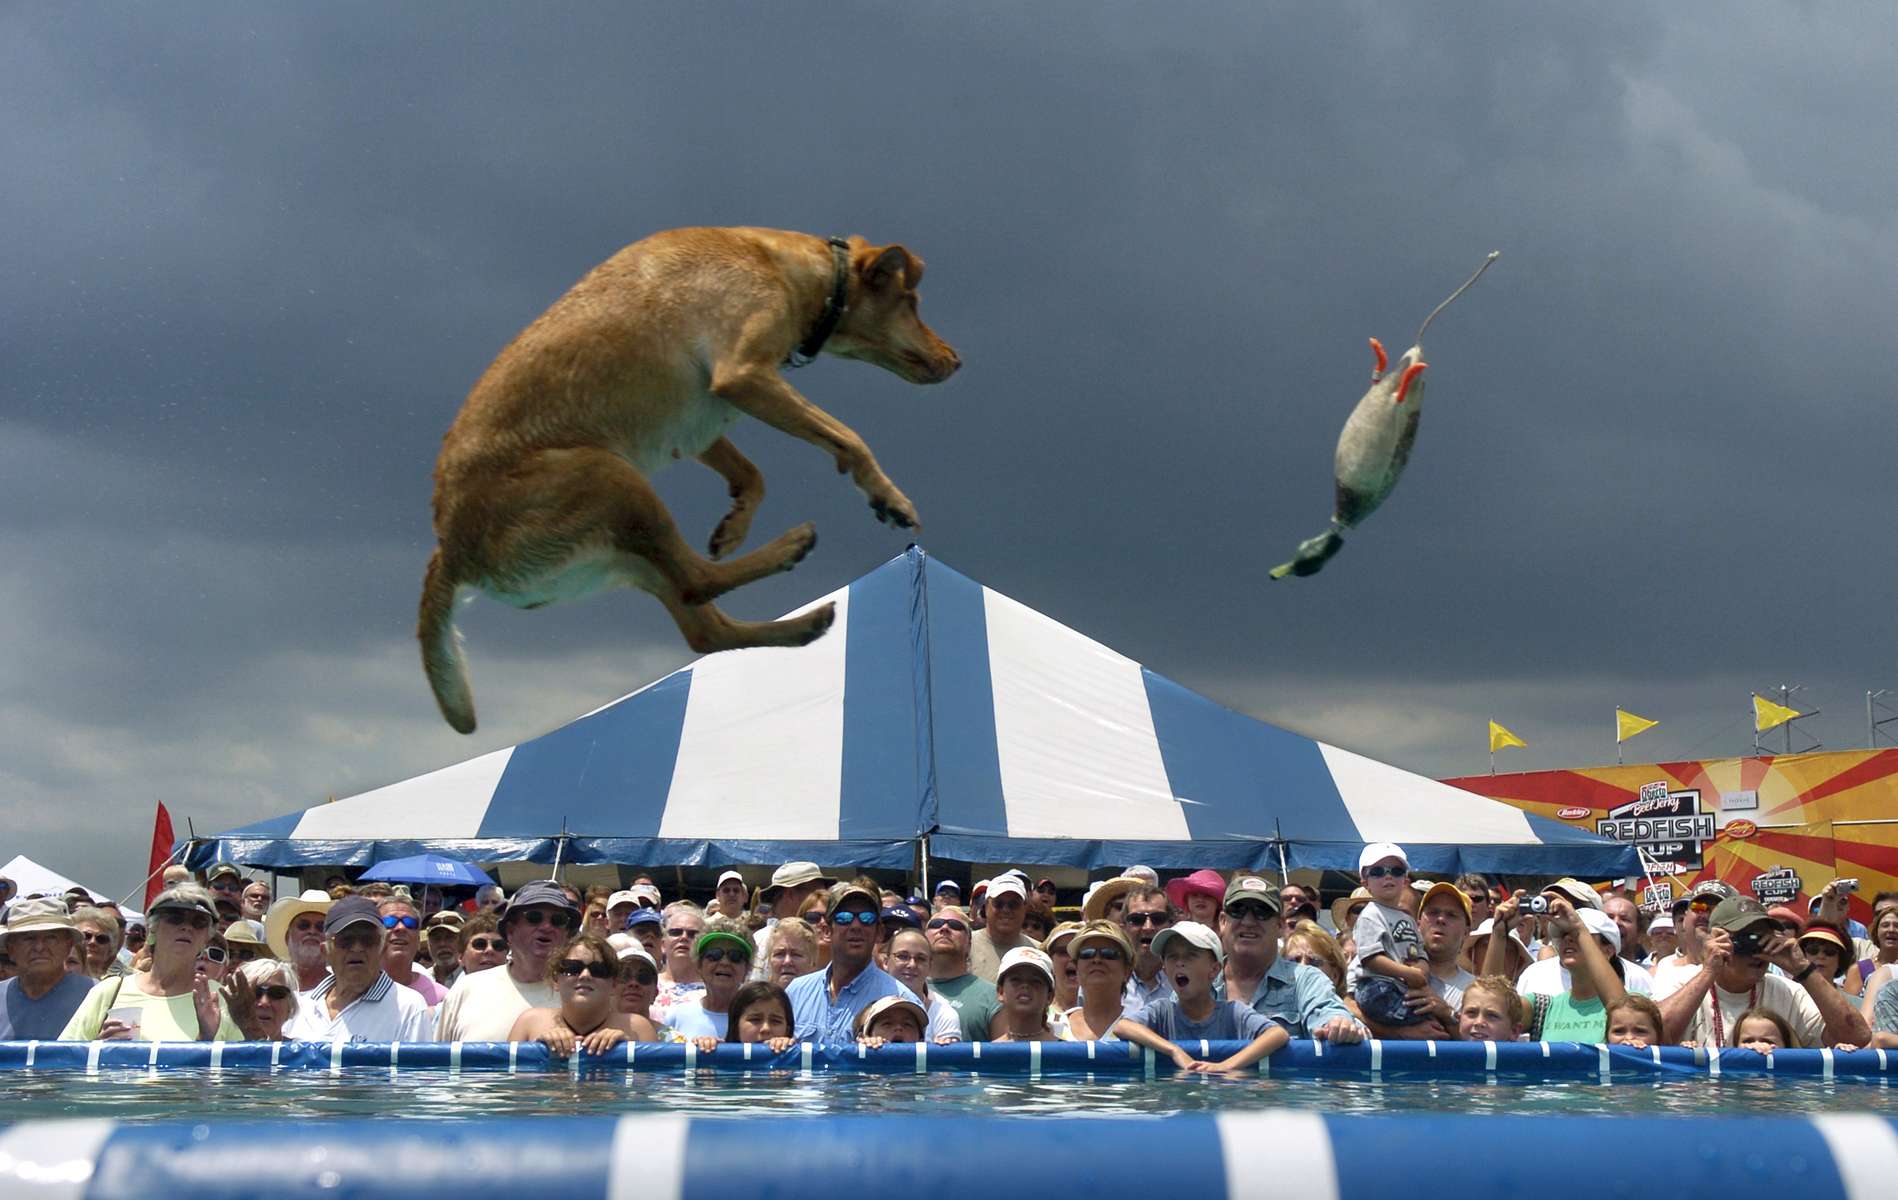 Bailey, a 4-year-old yellow lab, leaps after a rubber duck thrown by April Schortz during the Splash Dogs competion in Laishley Park Sunday, May 6, 2007. Bailey's jump was 17 feet and 1 inch. 